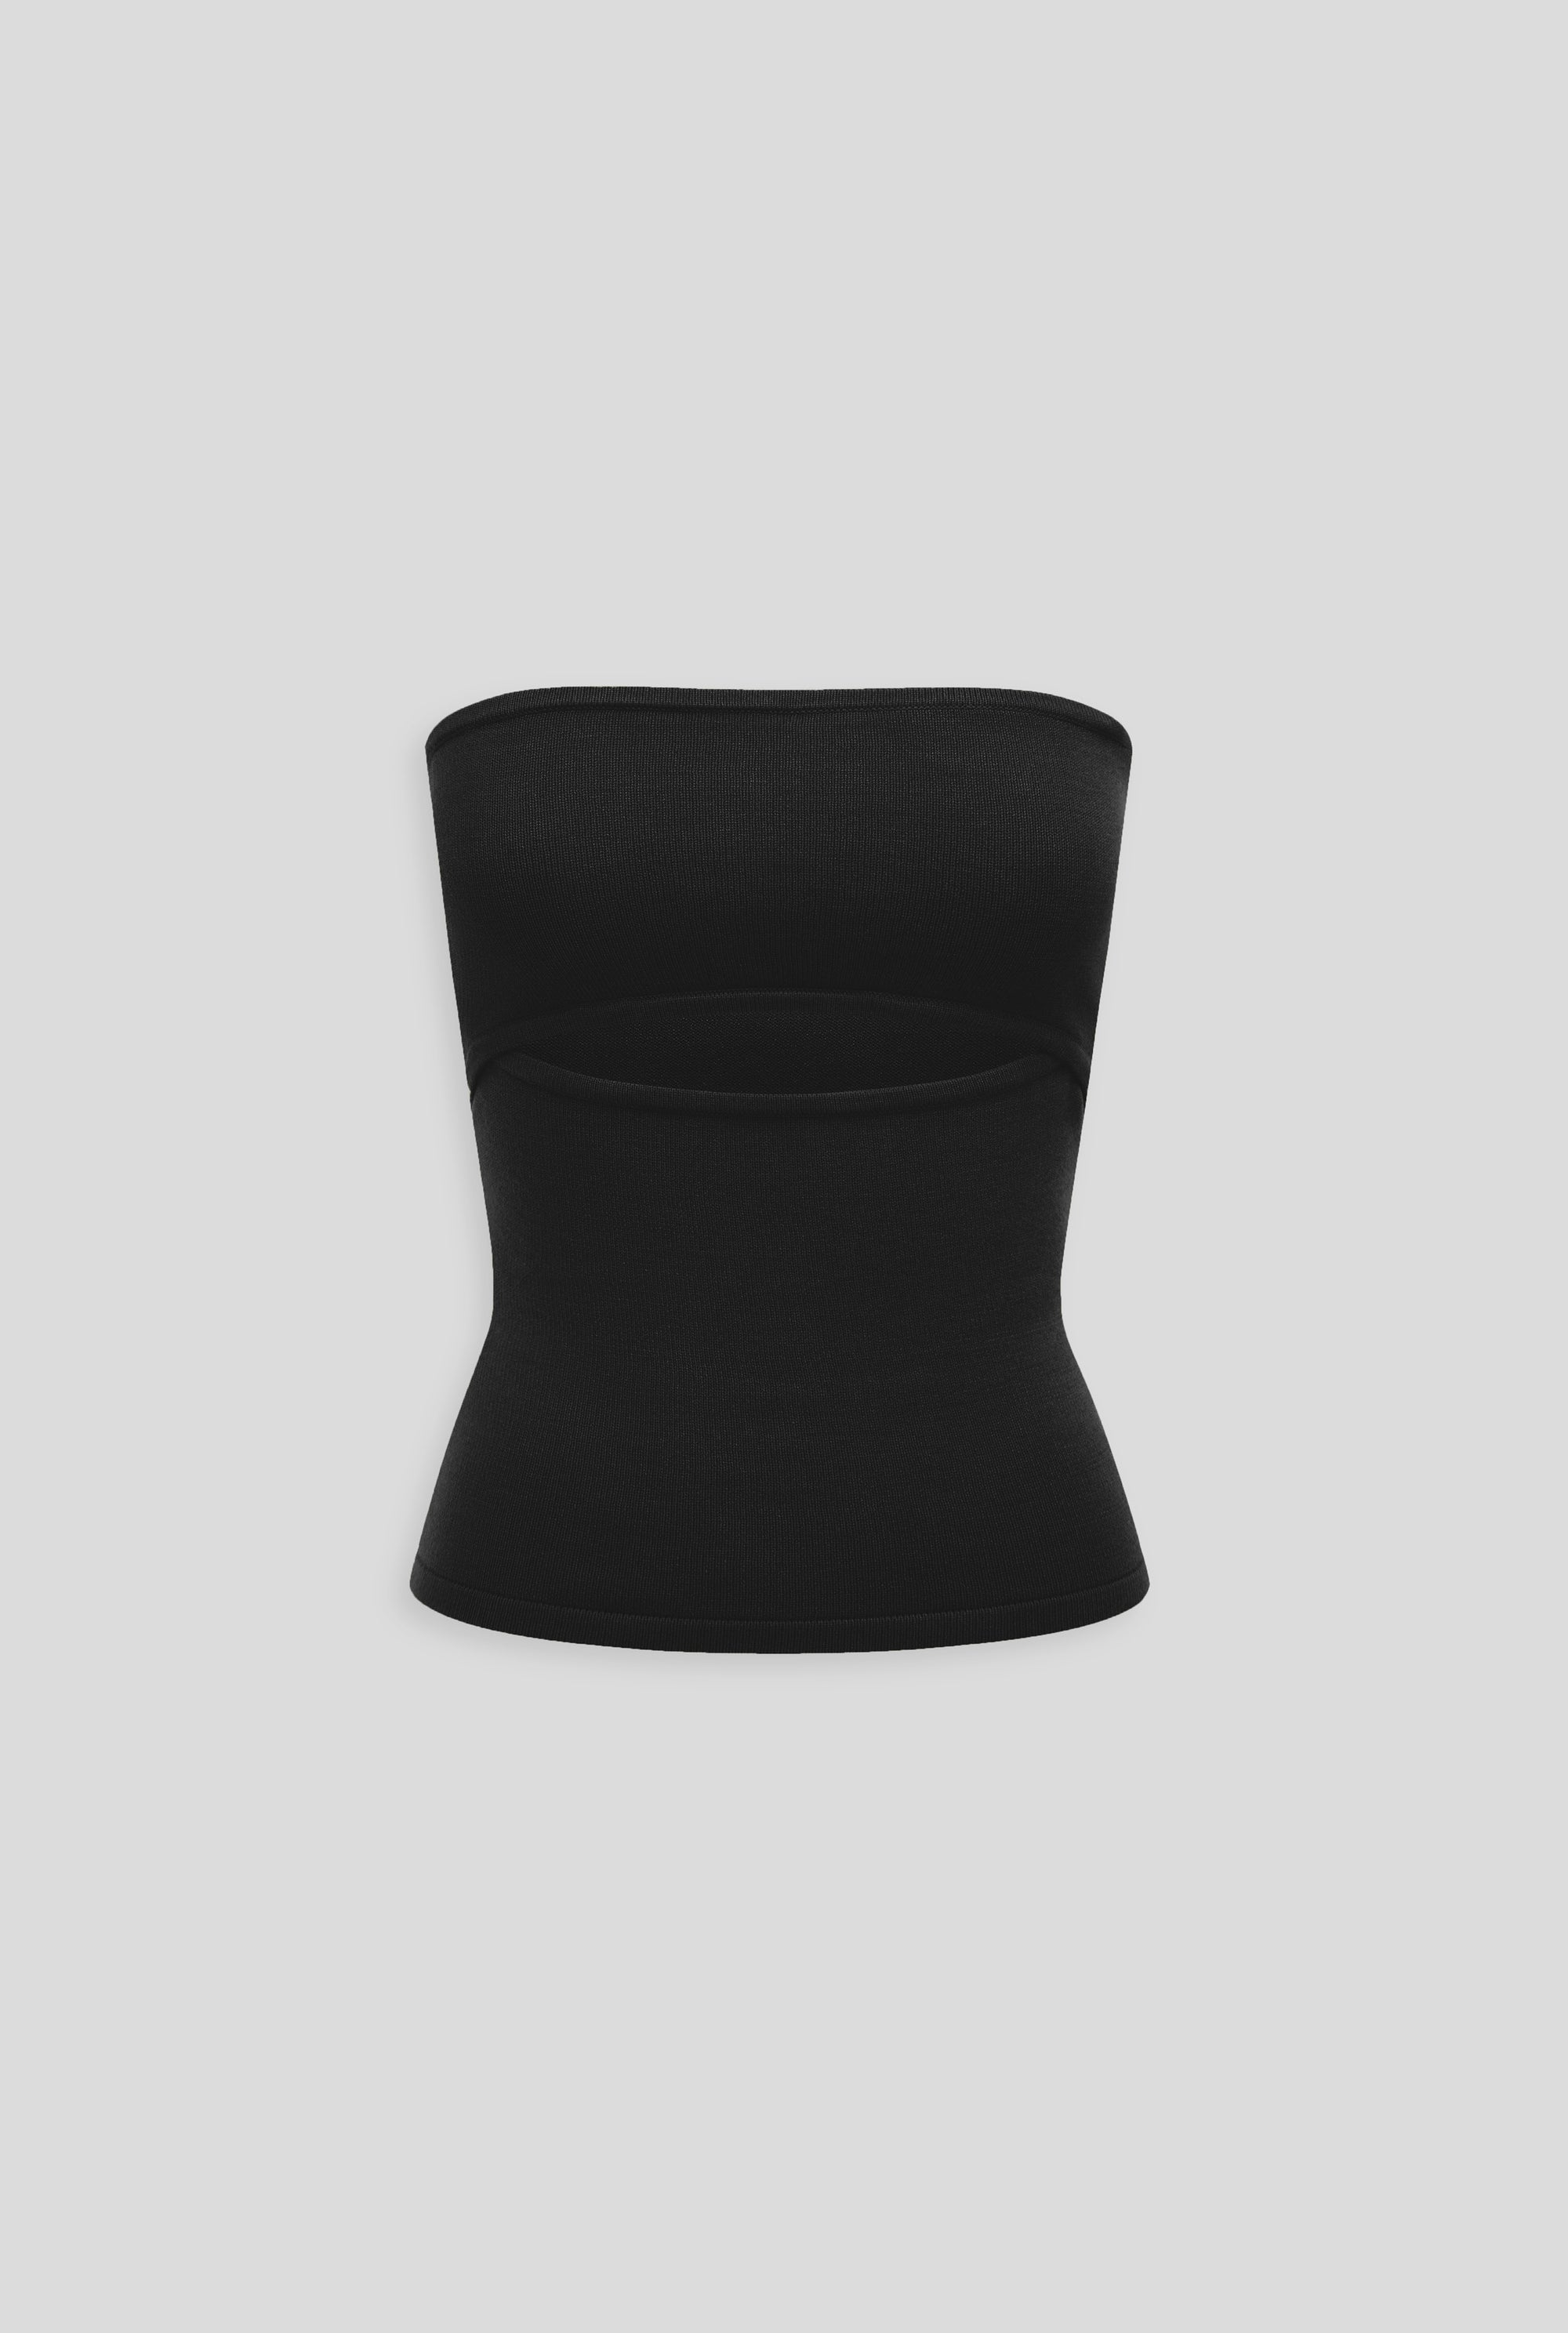 Venroy - Womens Cut Out Strapless Knit Top in Black | Venroy | Premium ...